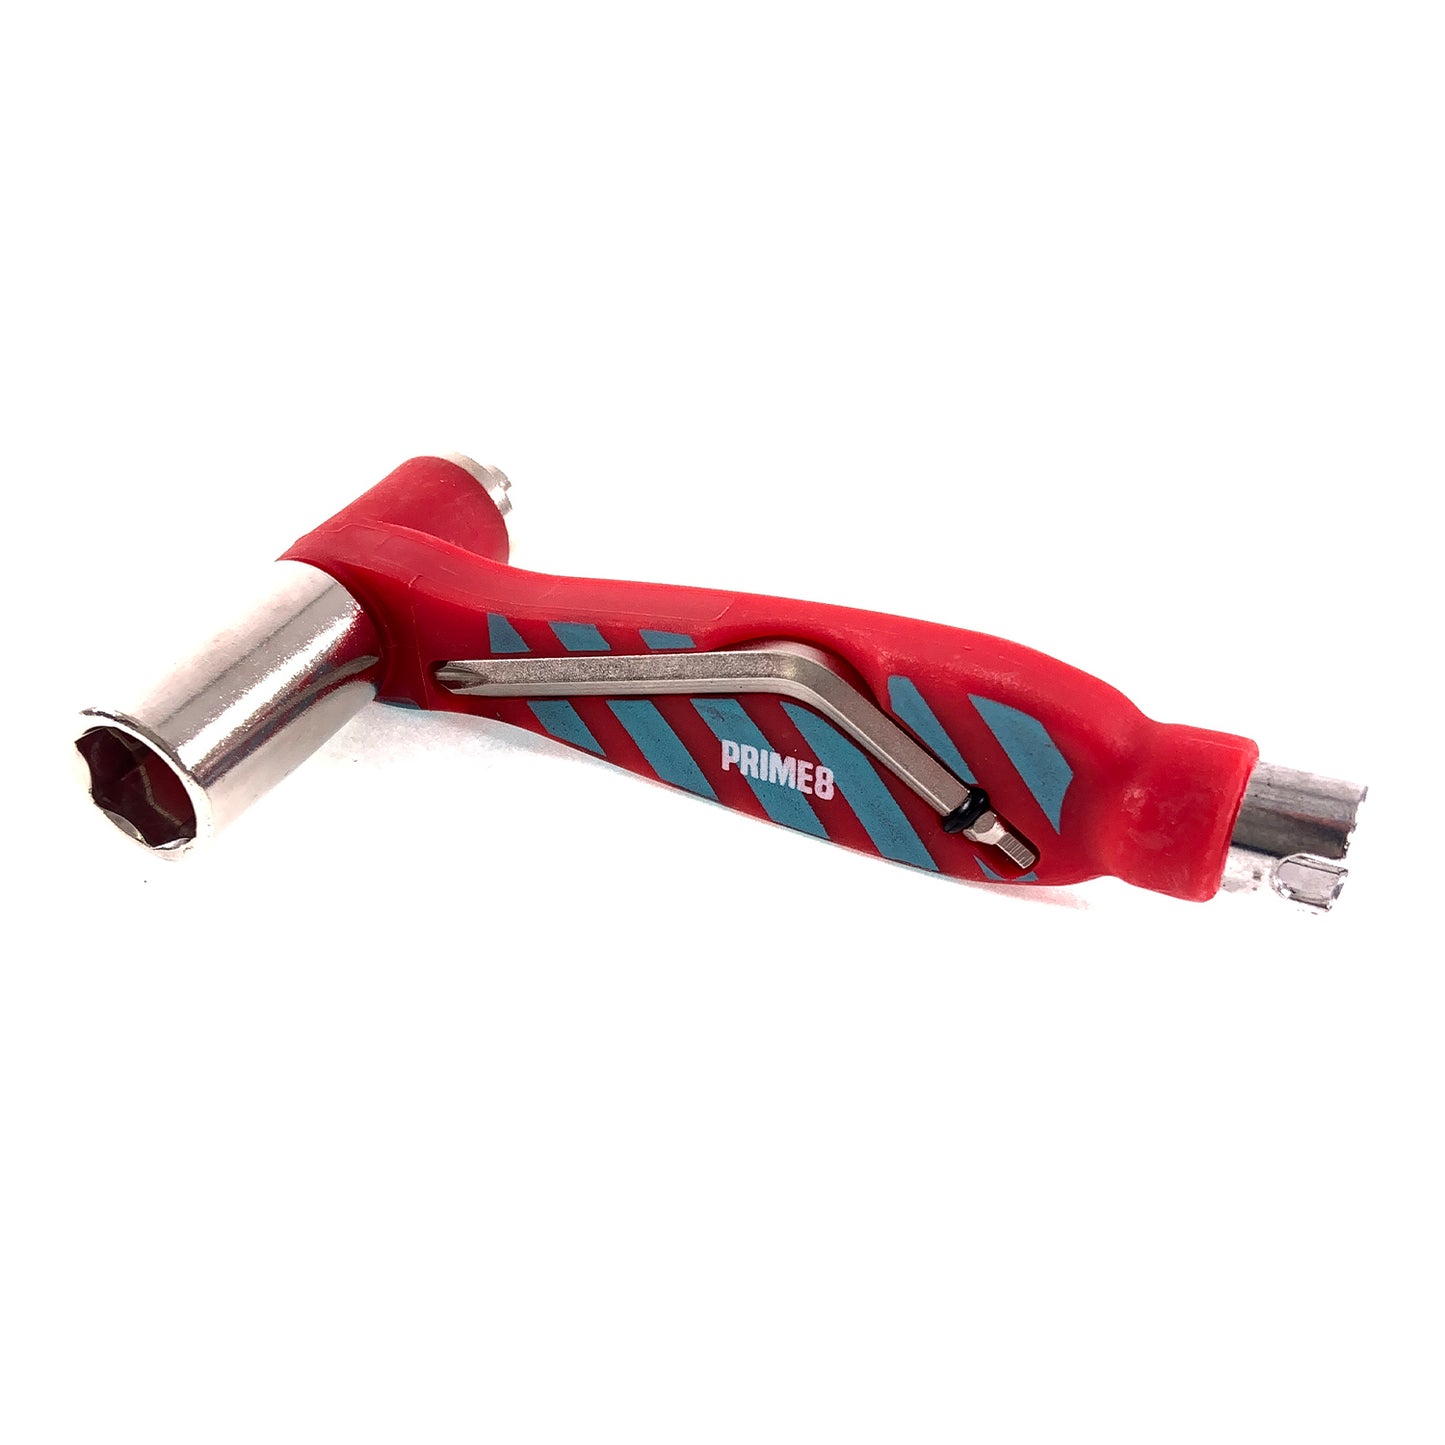 Prime8 #1 Tool - Red - Prime Delux Store